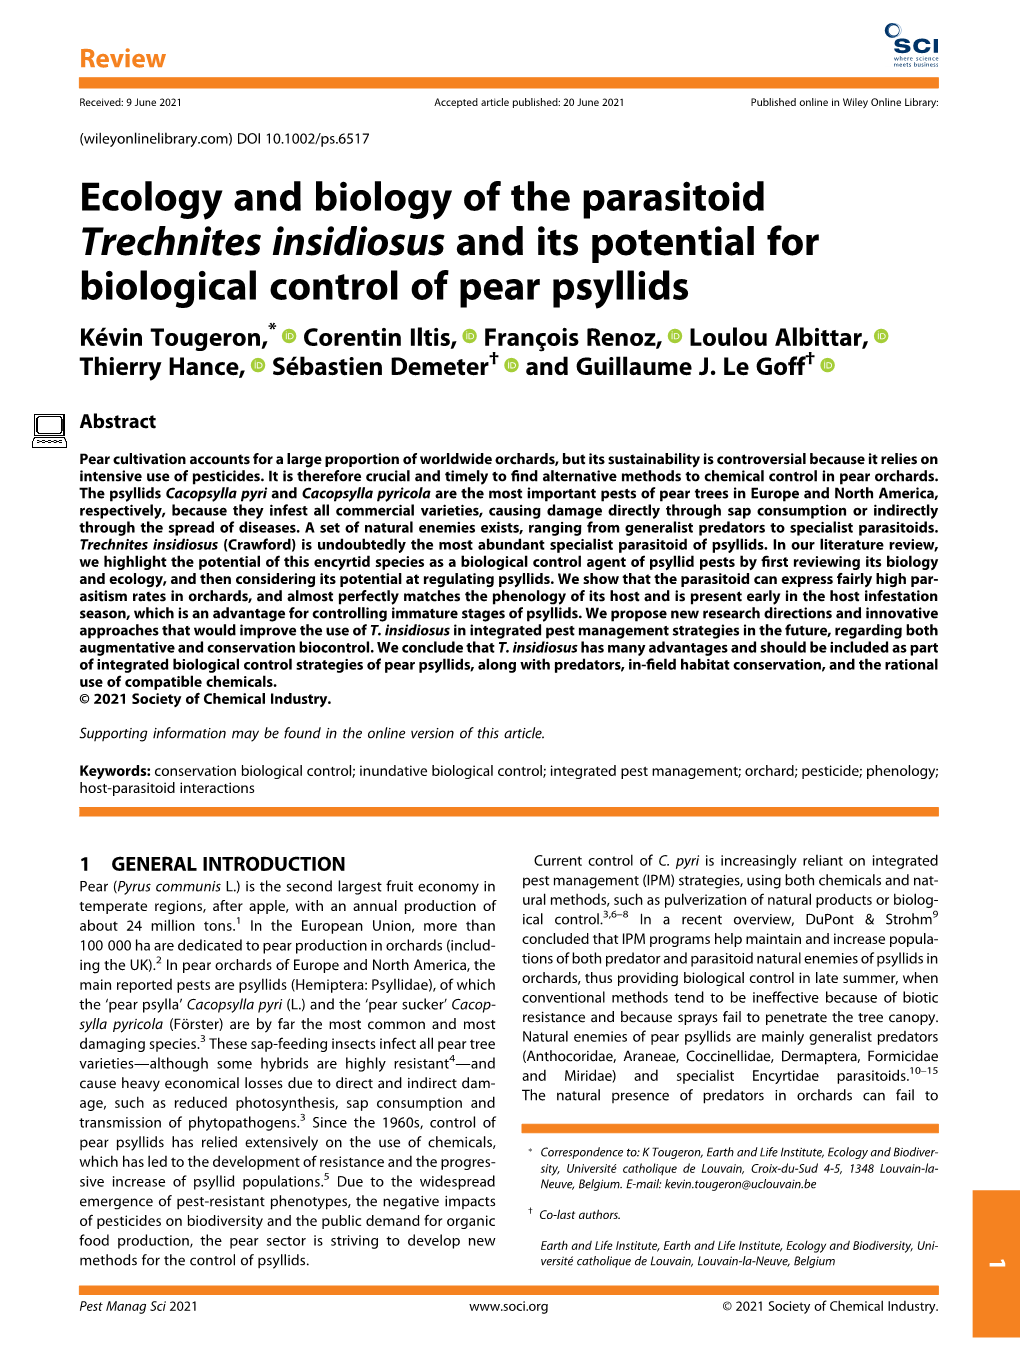 Ecology and Biology of the Parasitoid Trechnites